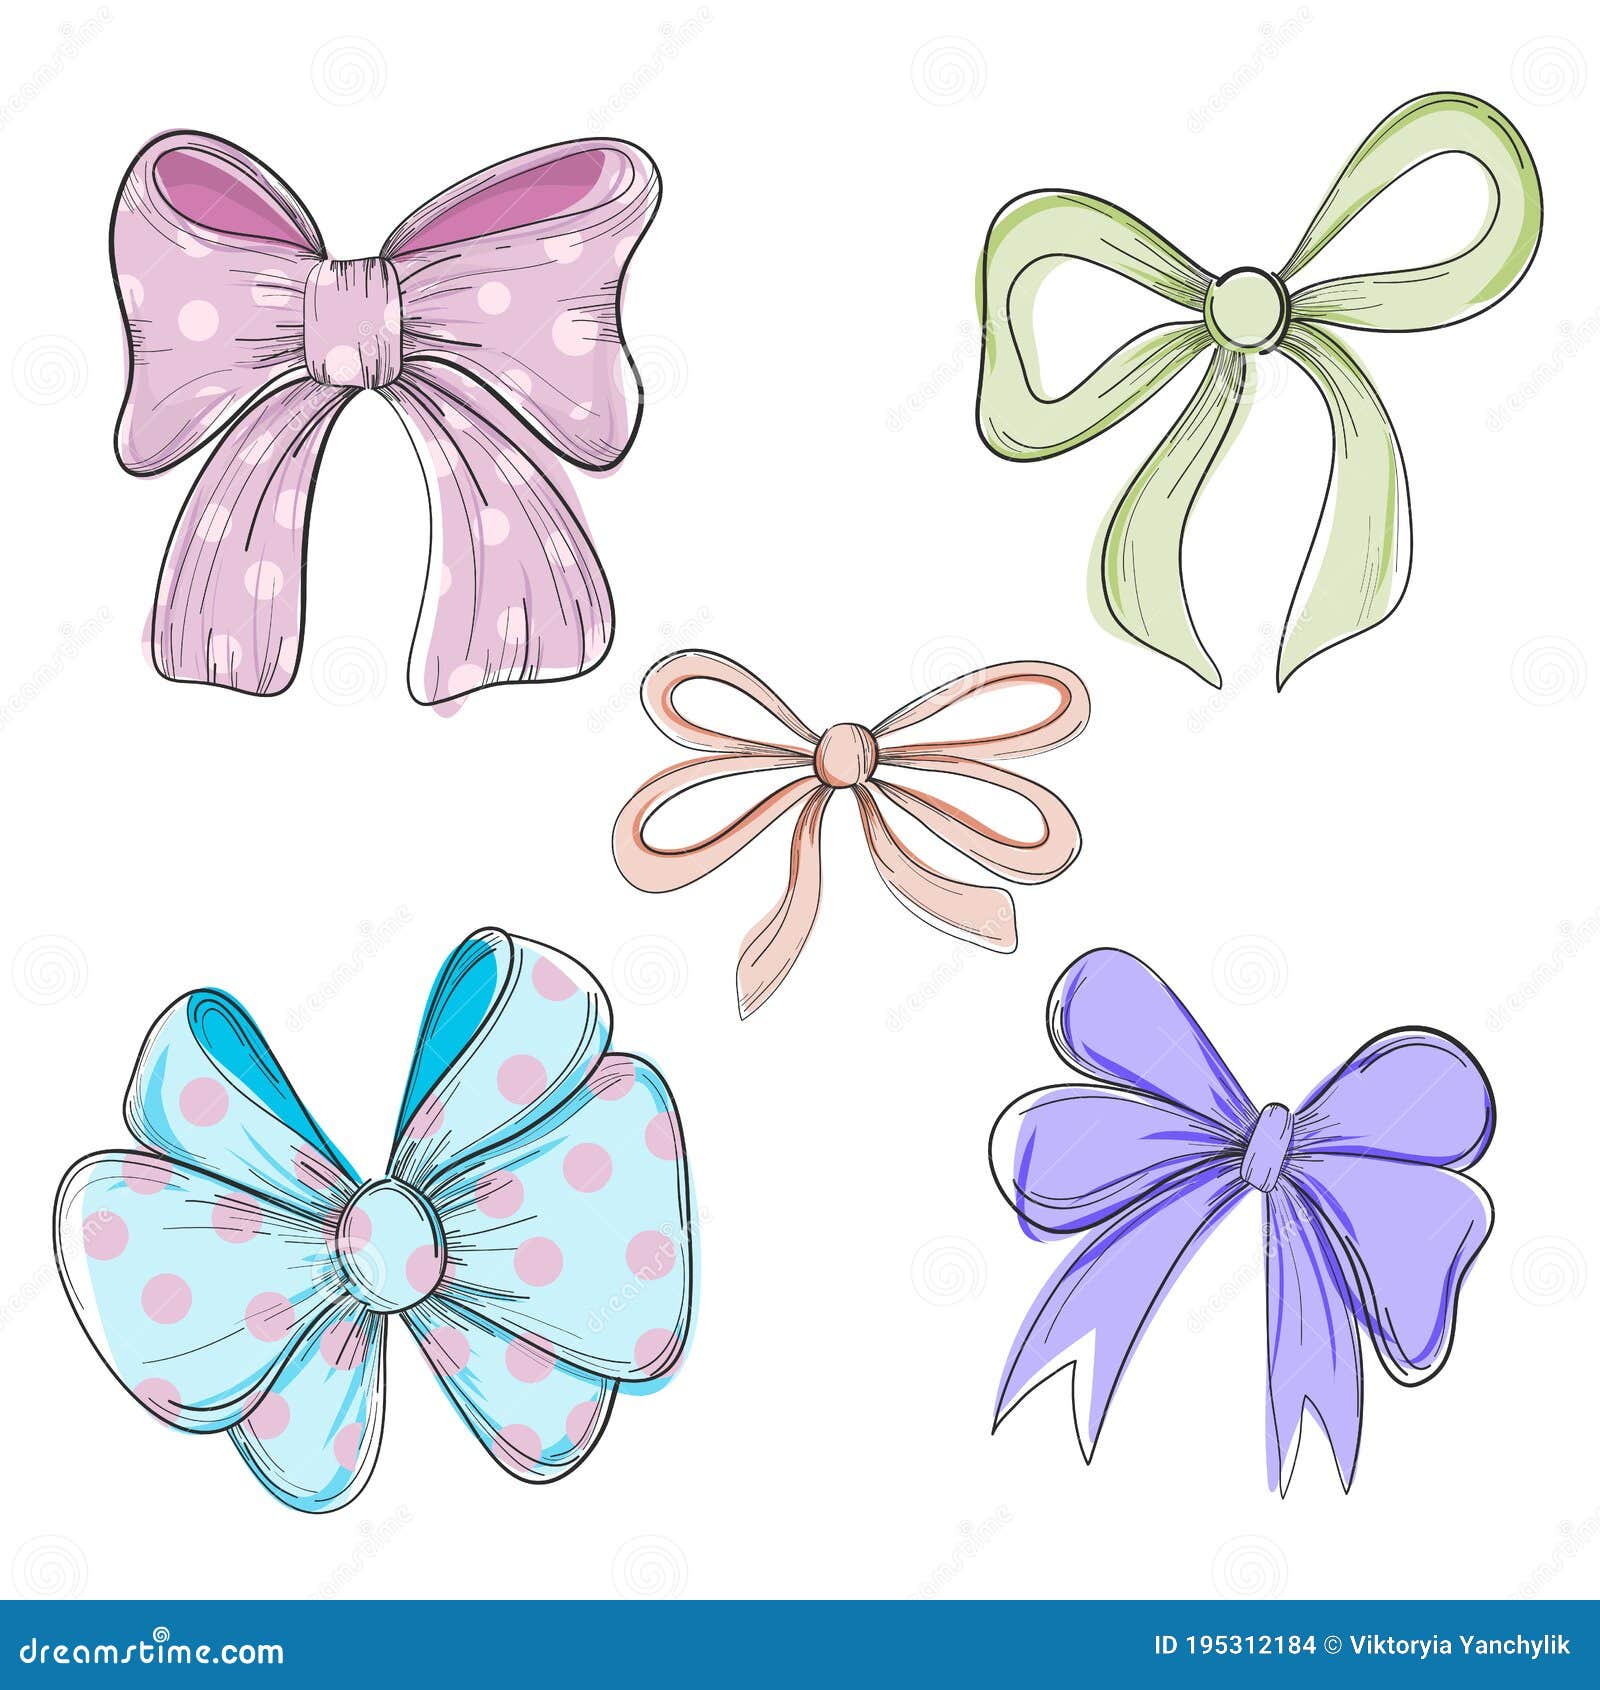 https://thumbs.dreamstime.com/z/collection-hand-drawn-vector-bows-ribbons-illustration-cute-freehand-colored-bow-doodle-black-outline-girl-hair-accessories-195312184.jpg